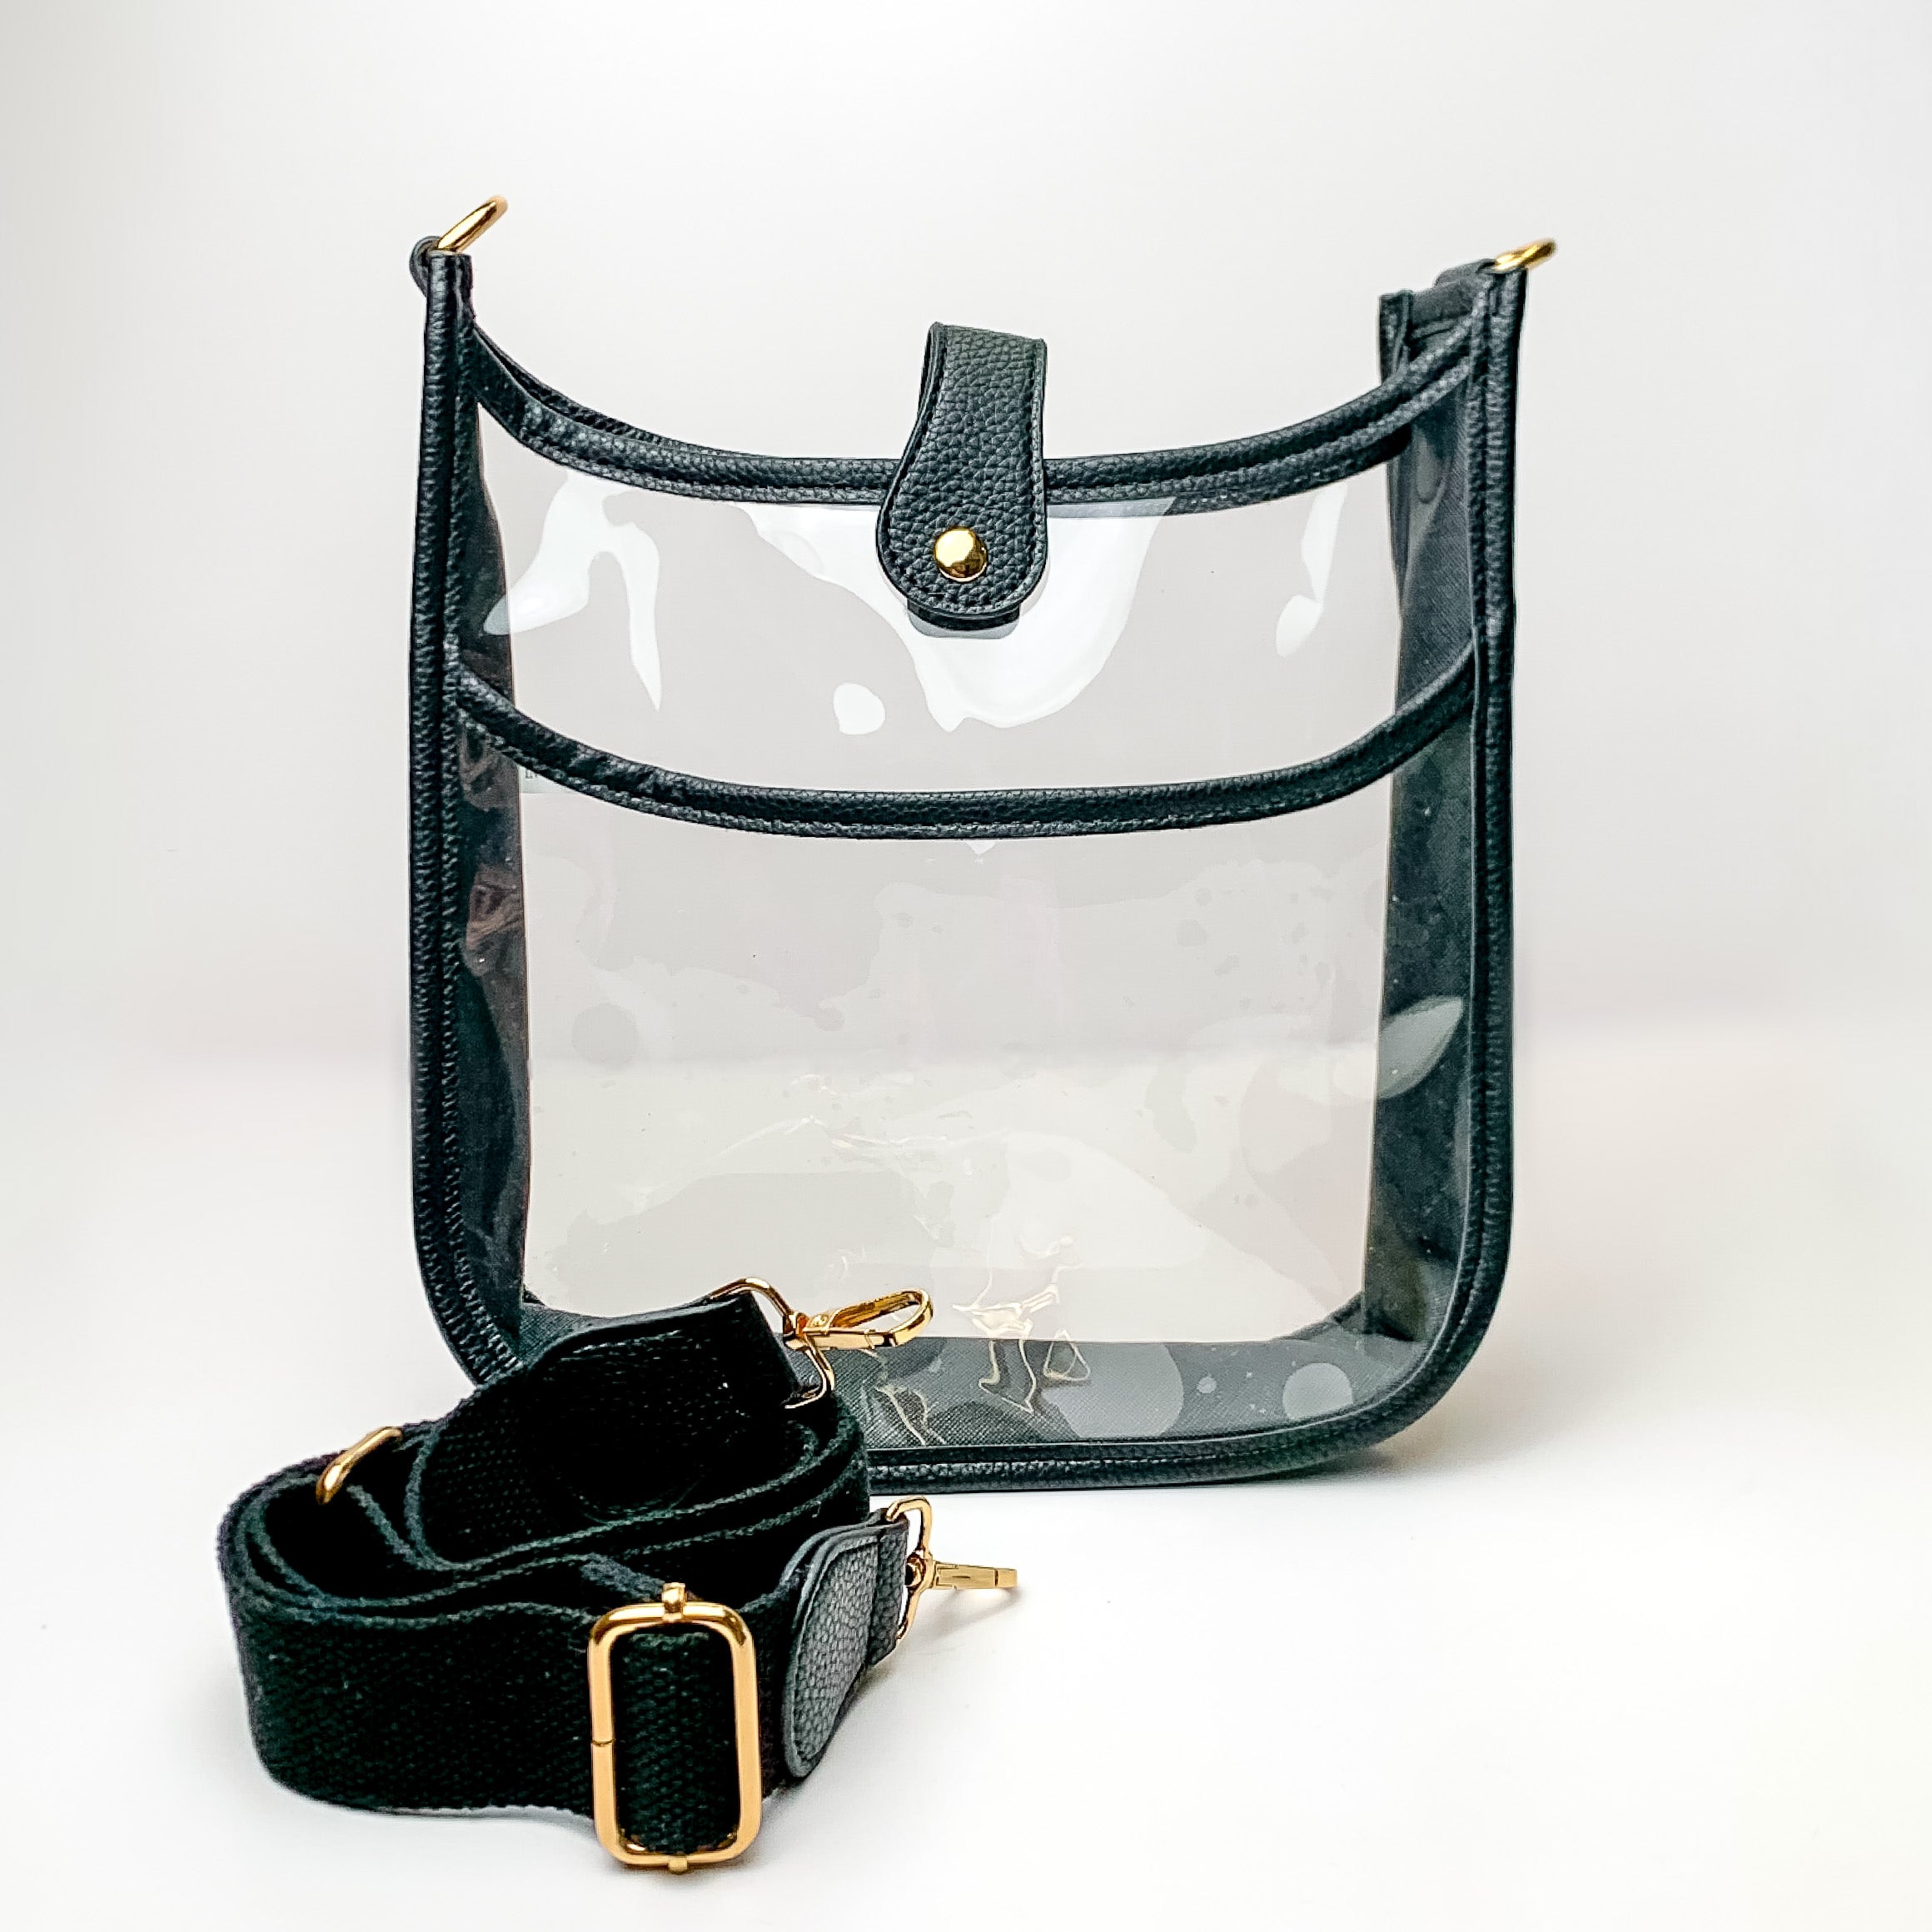 Clear crossbody purse in black with a black purse strap pictured in front of the purse. This purse is pictured on a white background. 